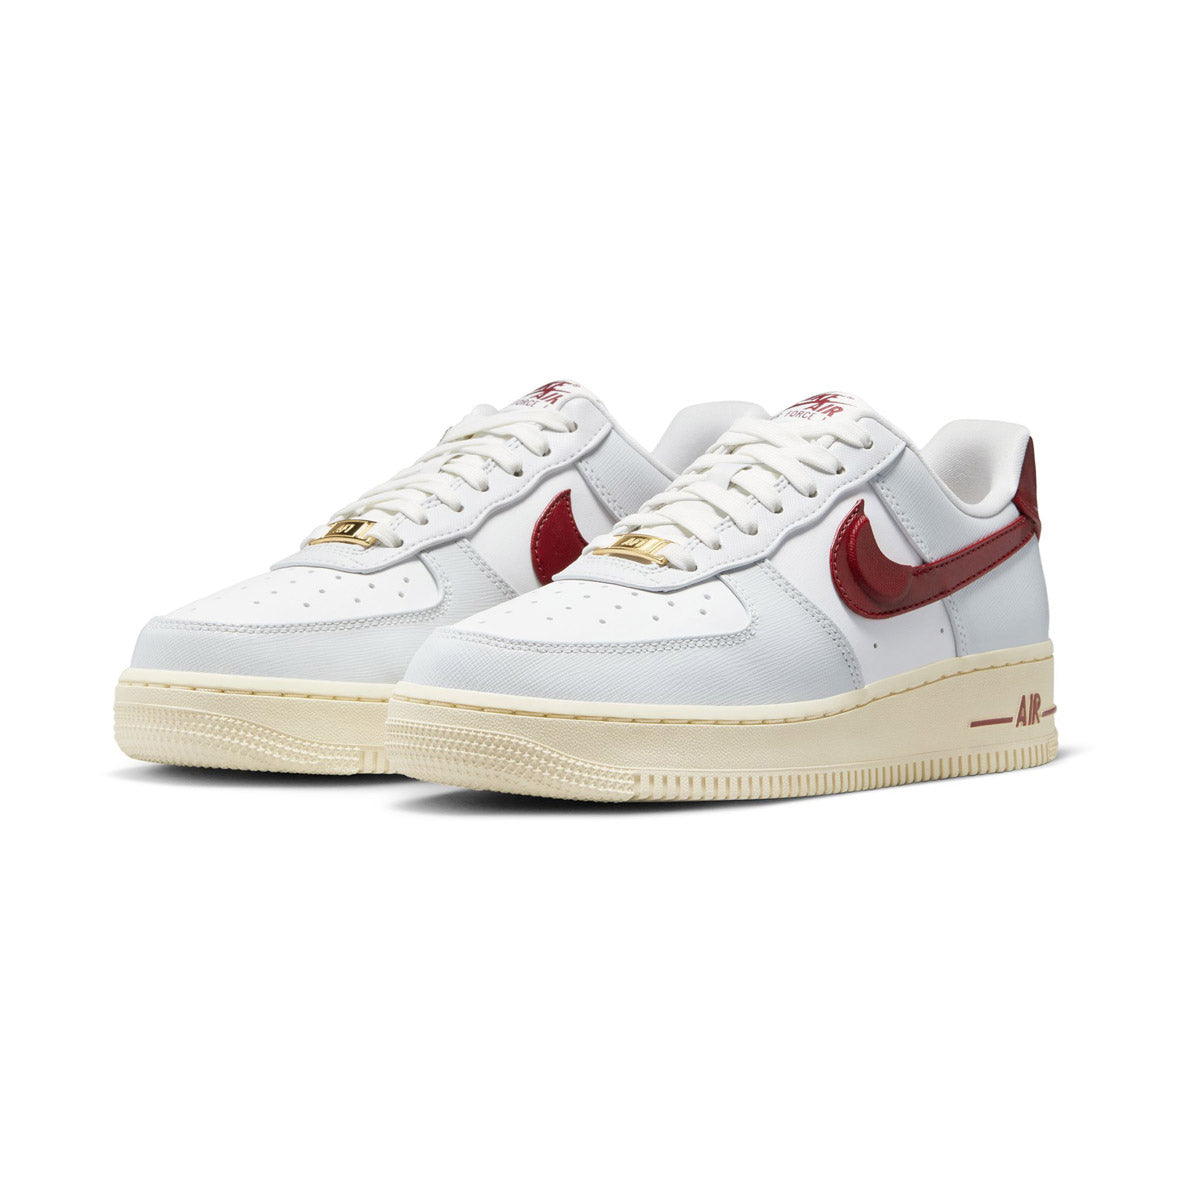 Nike Air Force 1 '07 SE Women's Shoes 7.5